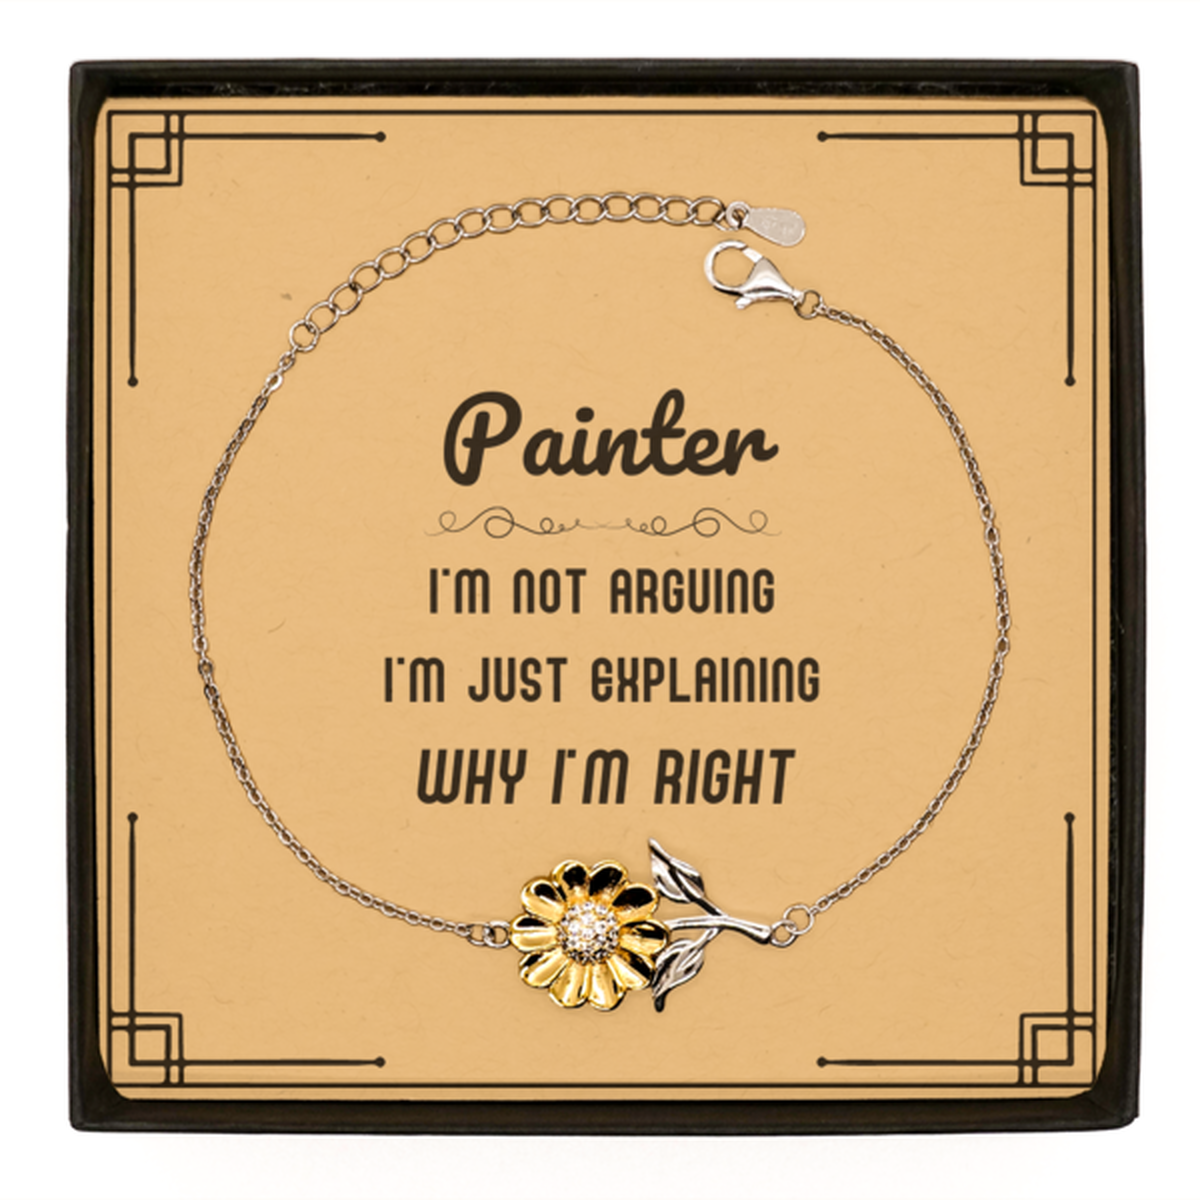 Painter I'm not Arguing. I'm Just Explaining Why I'm RIGHT Sunflower Bracelet, Funny Saying Quote Painter Gifts For Painter Message Card Graduation Birthday Christmas Gifts for Men Women Coworker